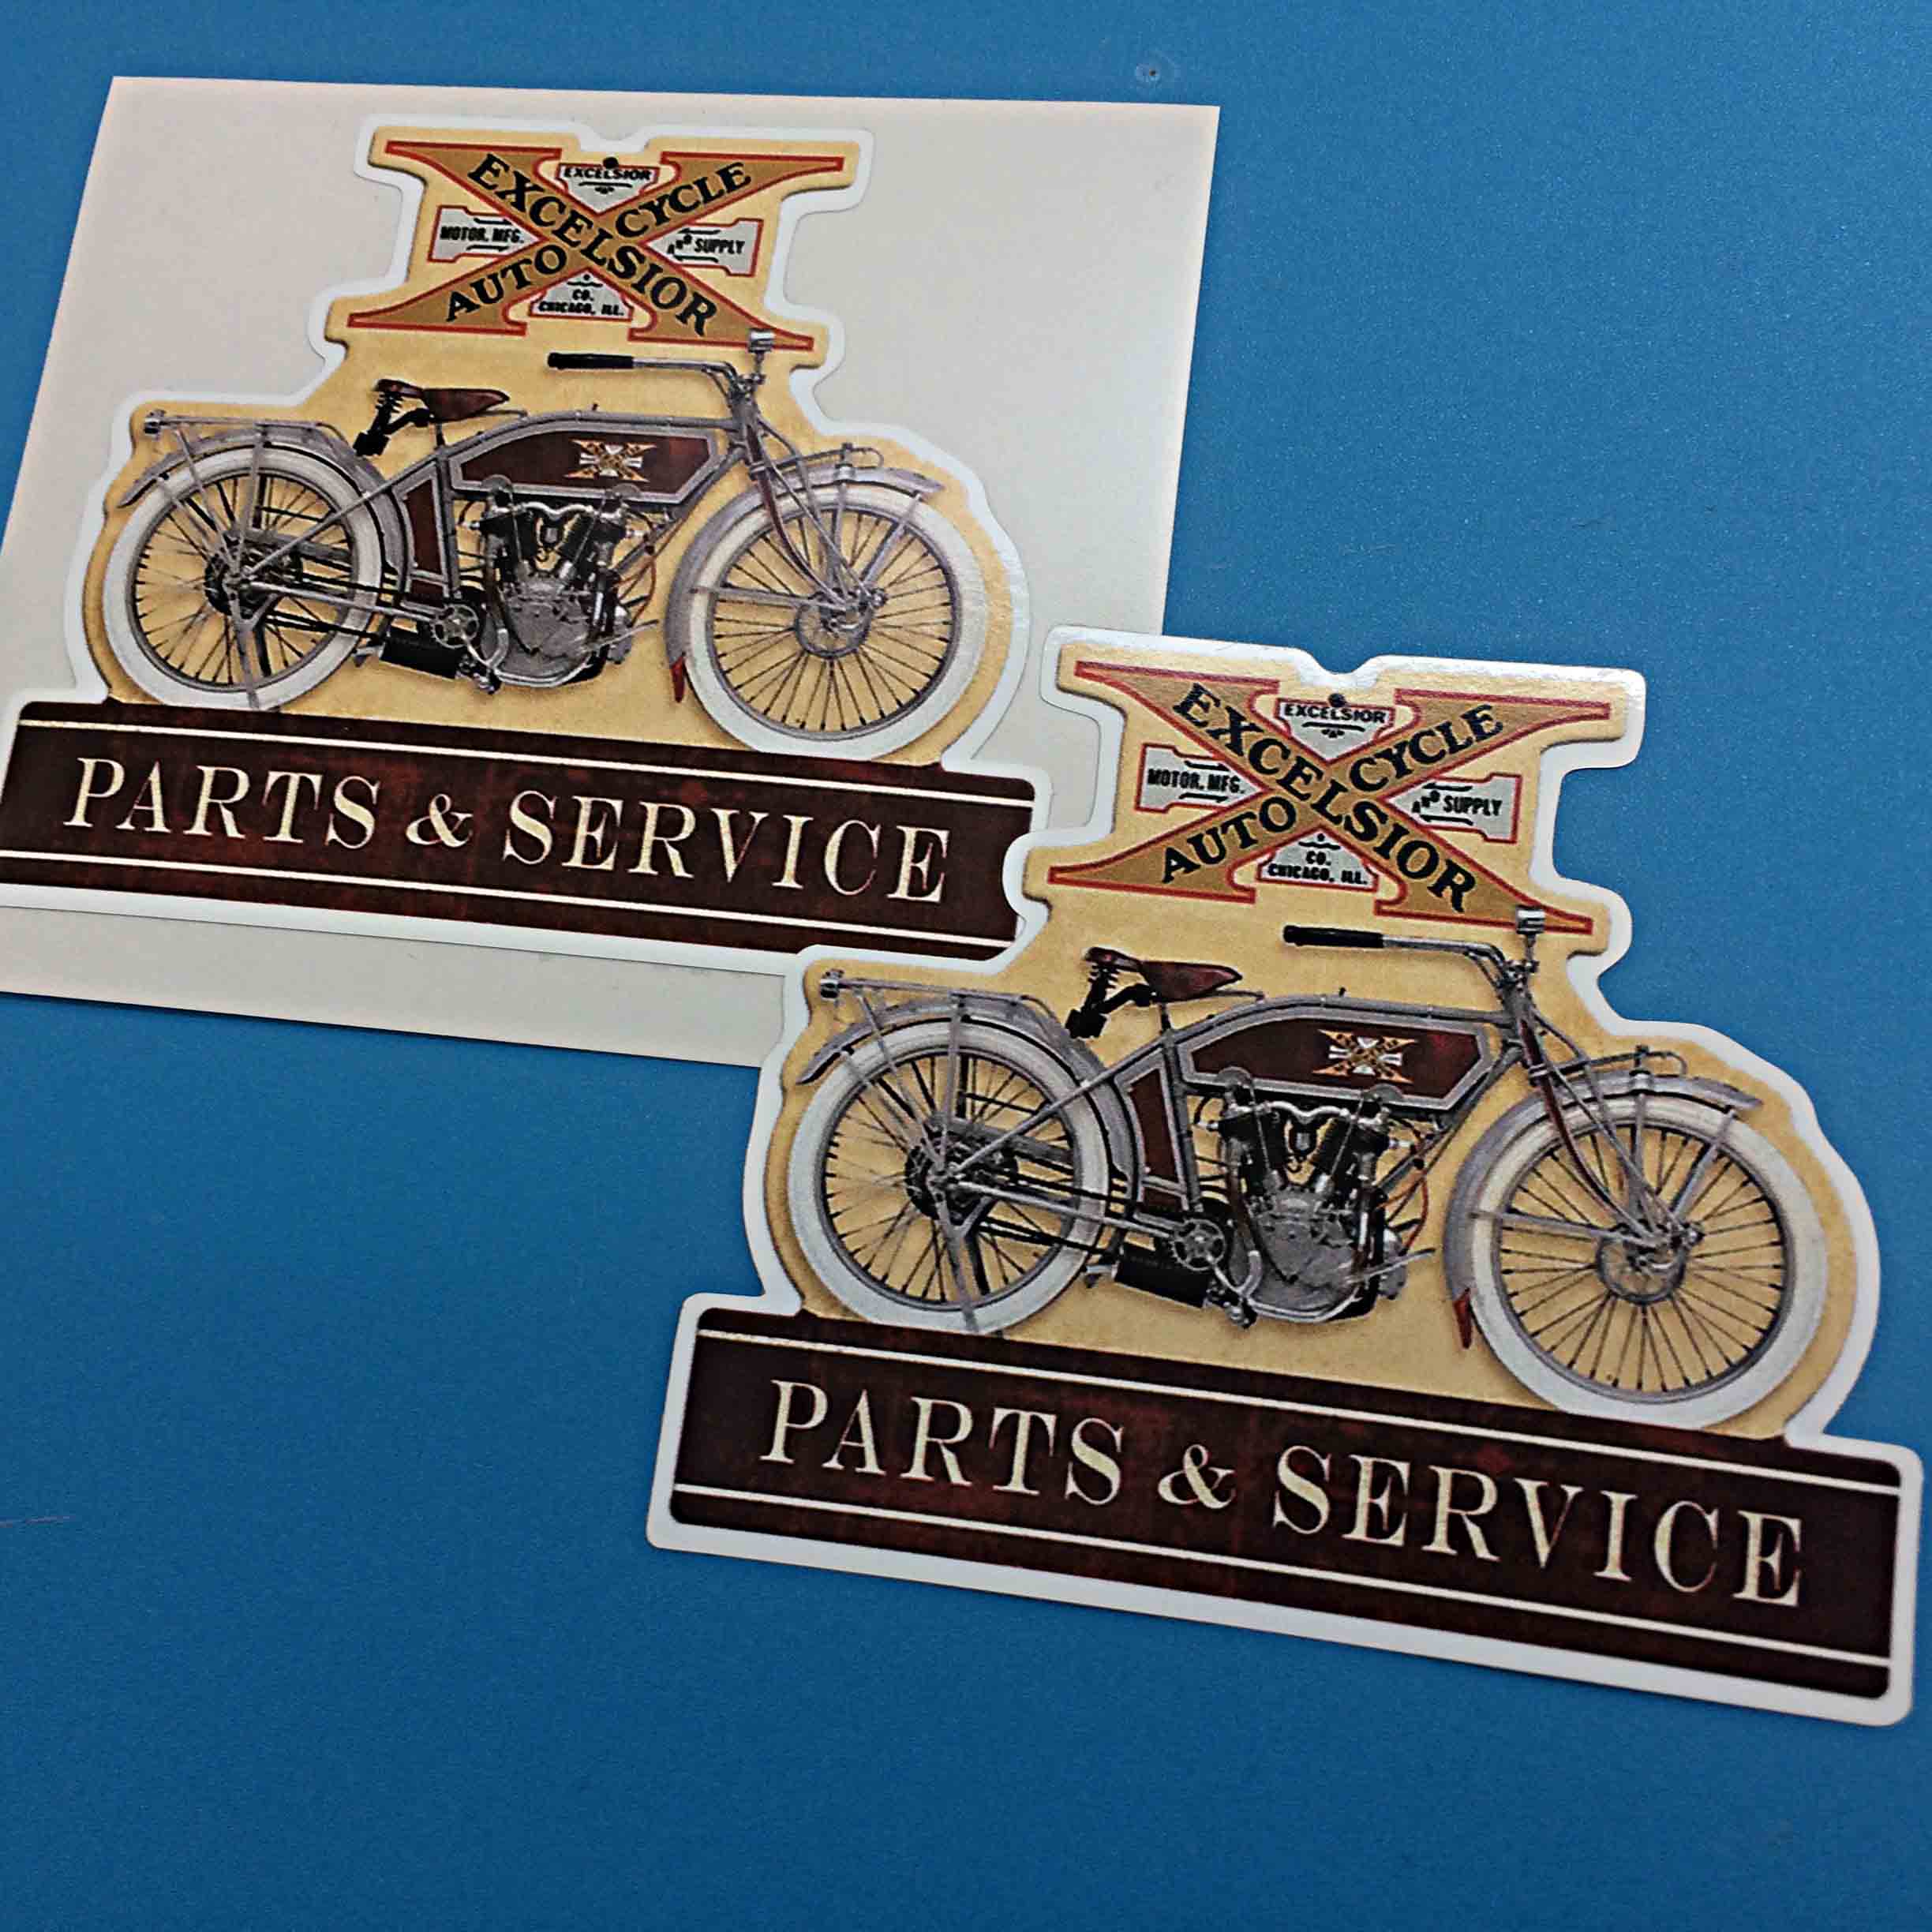 EXCELSIOR AUTO CYCLE PARTS AND SERVICE STICKERS. Excelsior Auto Cycle in black lettering on a gold X with additional lettering in the background - Excelsior Motor Mfg. Supply Co. Chicago, Il. Below is an Excelsior auto cycle and a banner Parts & Service.